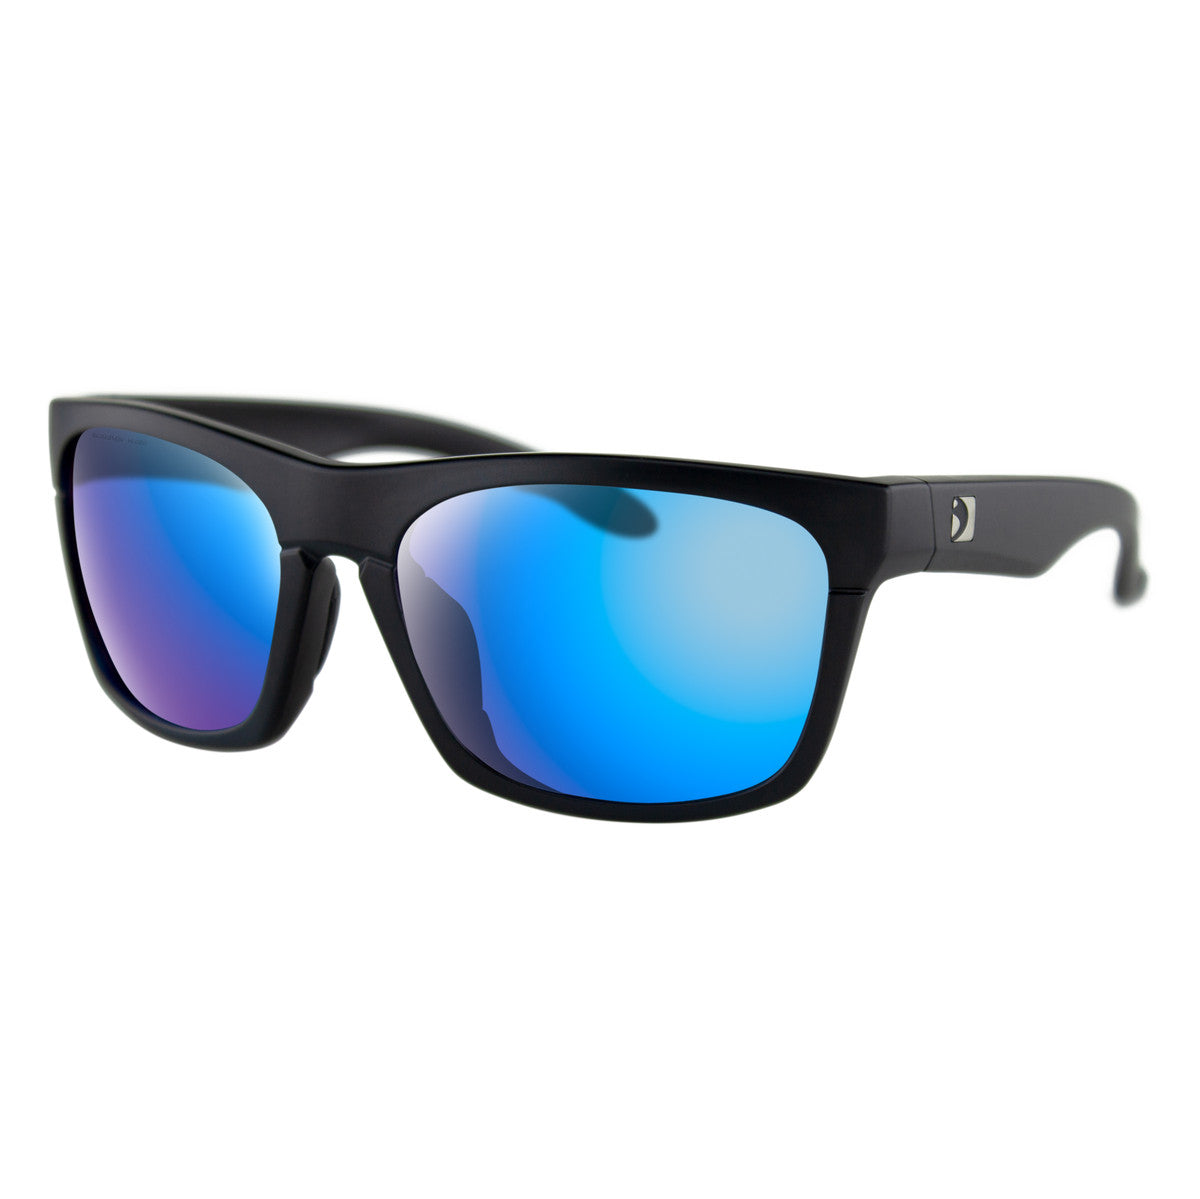 Bobster Route Sunglasses